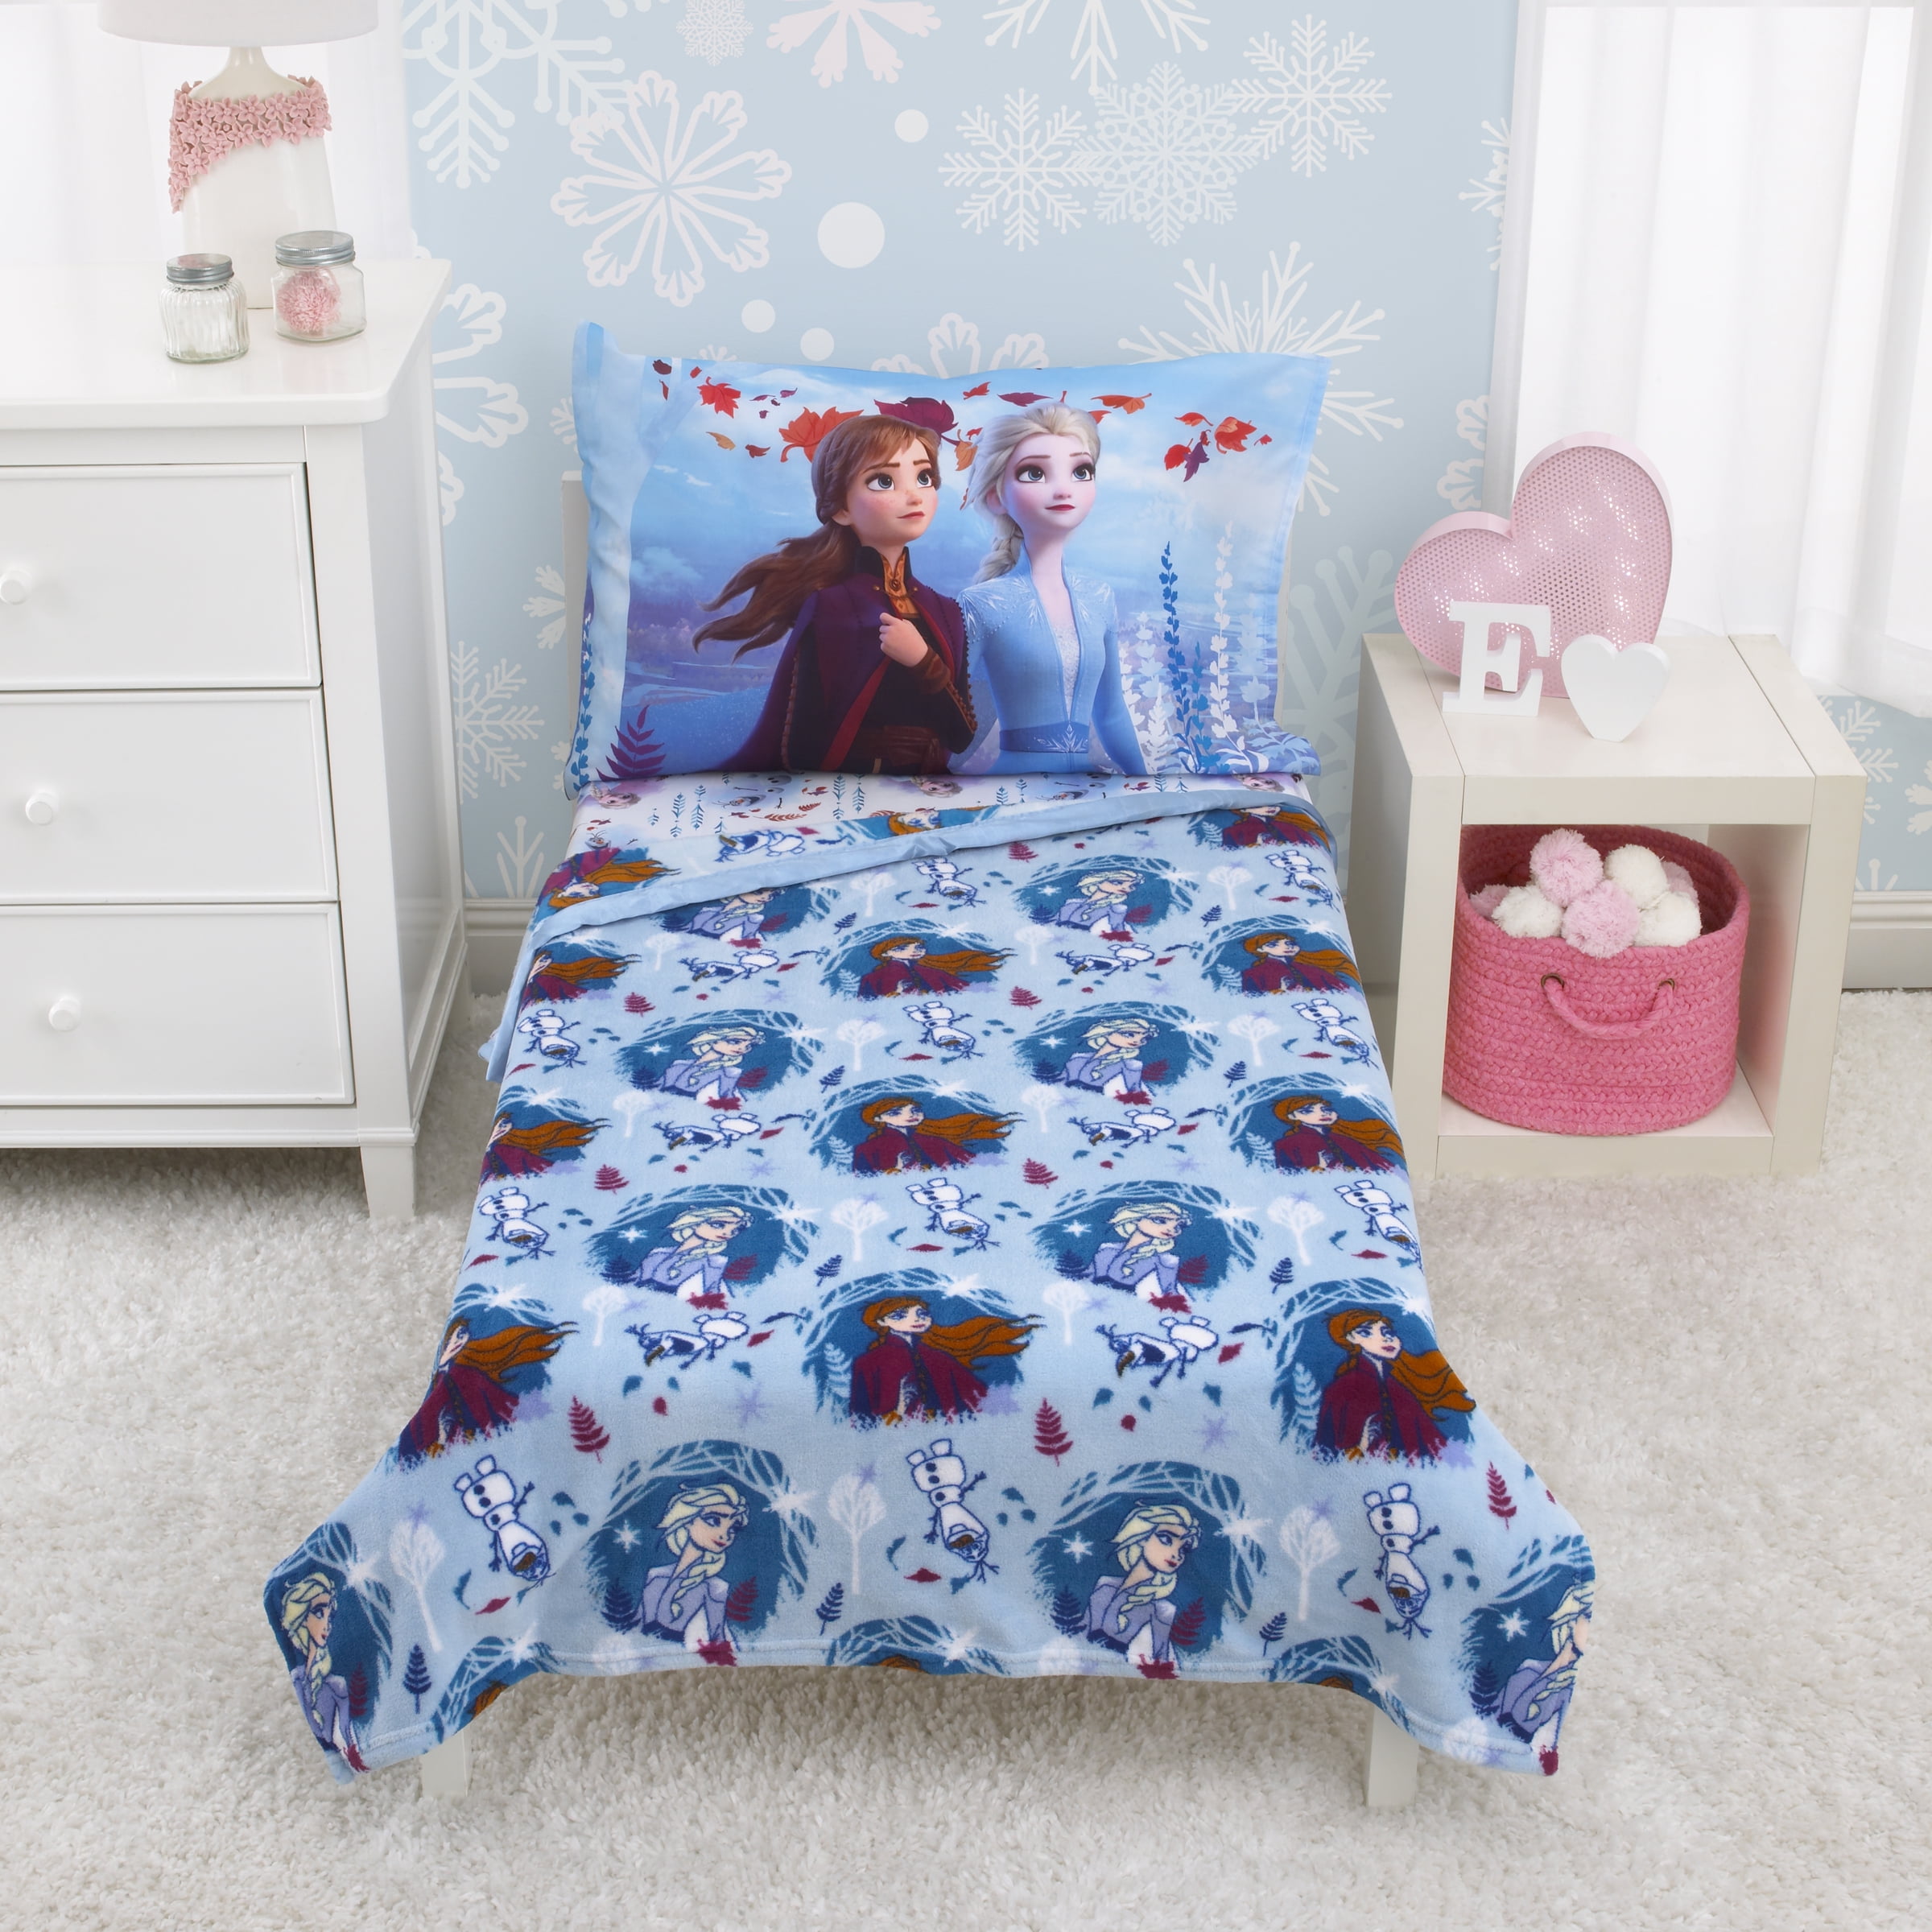 Plum and W Lavender Magical Journey 4 Piece Toddler Bed Set Details about   Disney Frozen 2